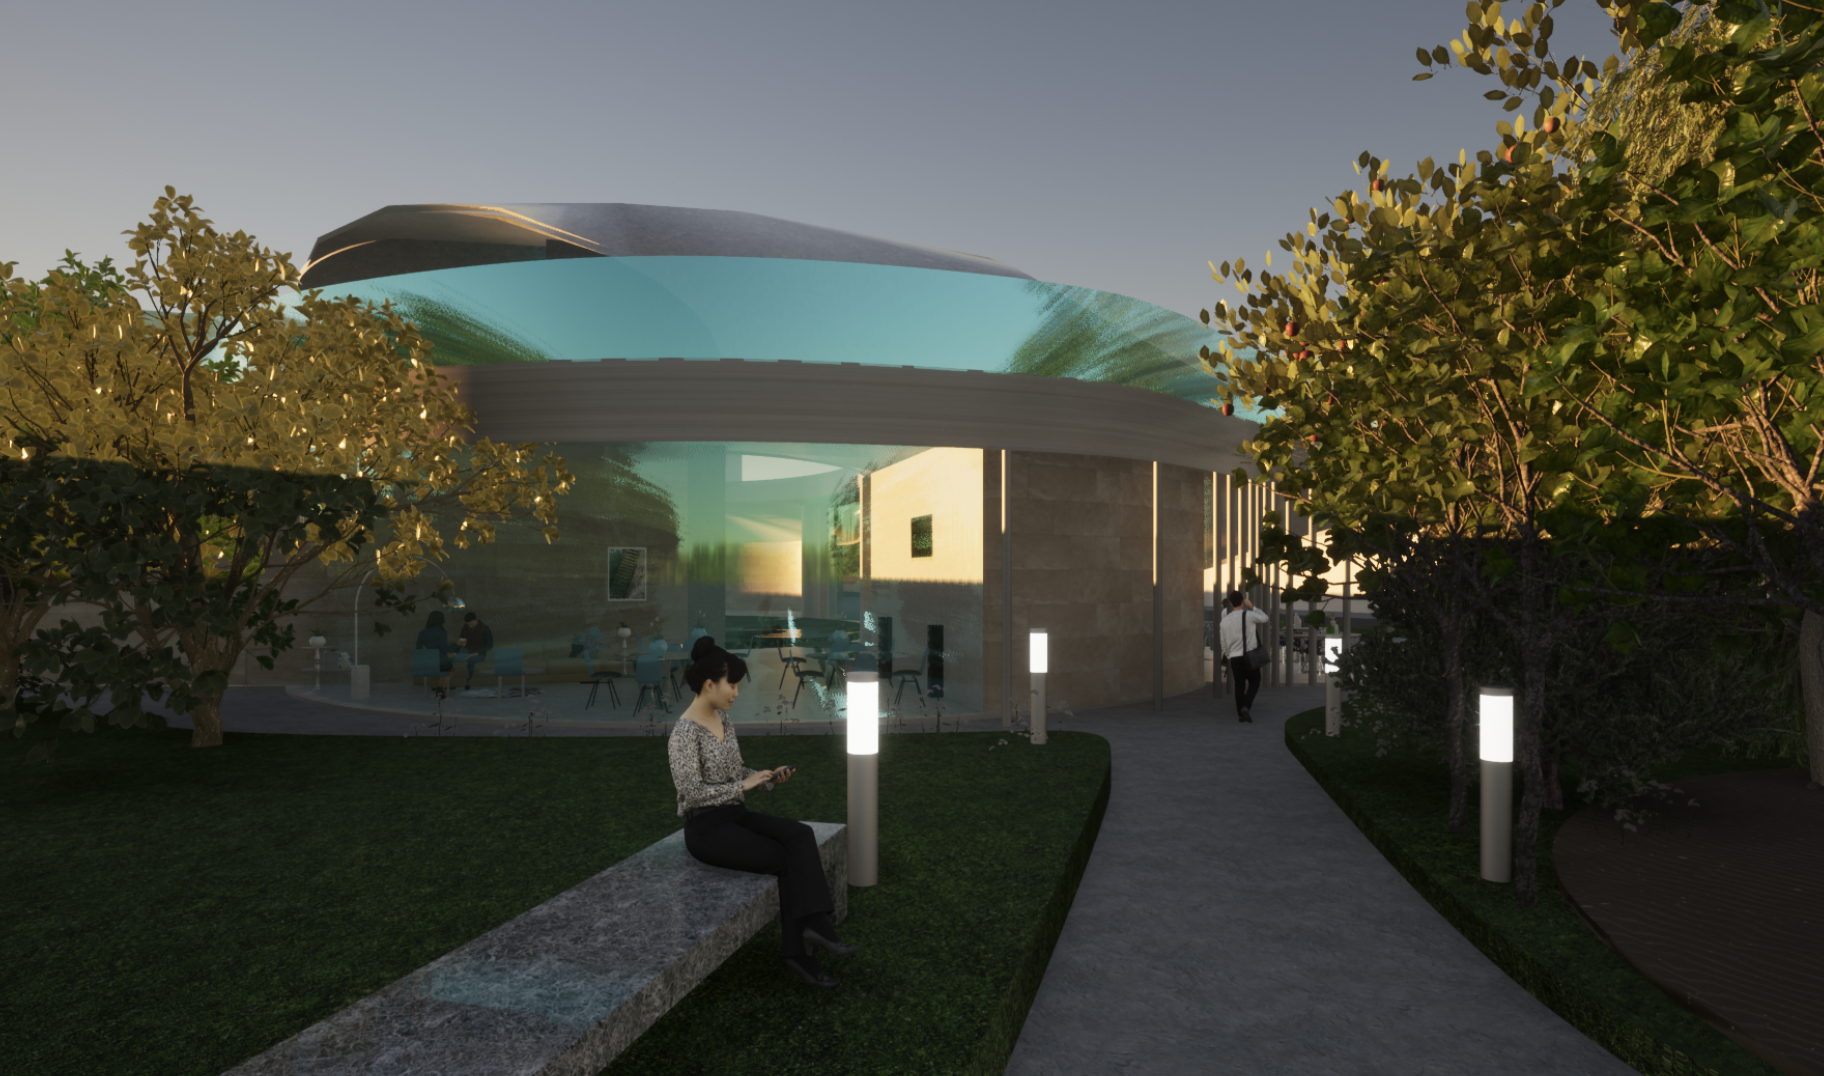 King and Dufferin Community Center Render